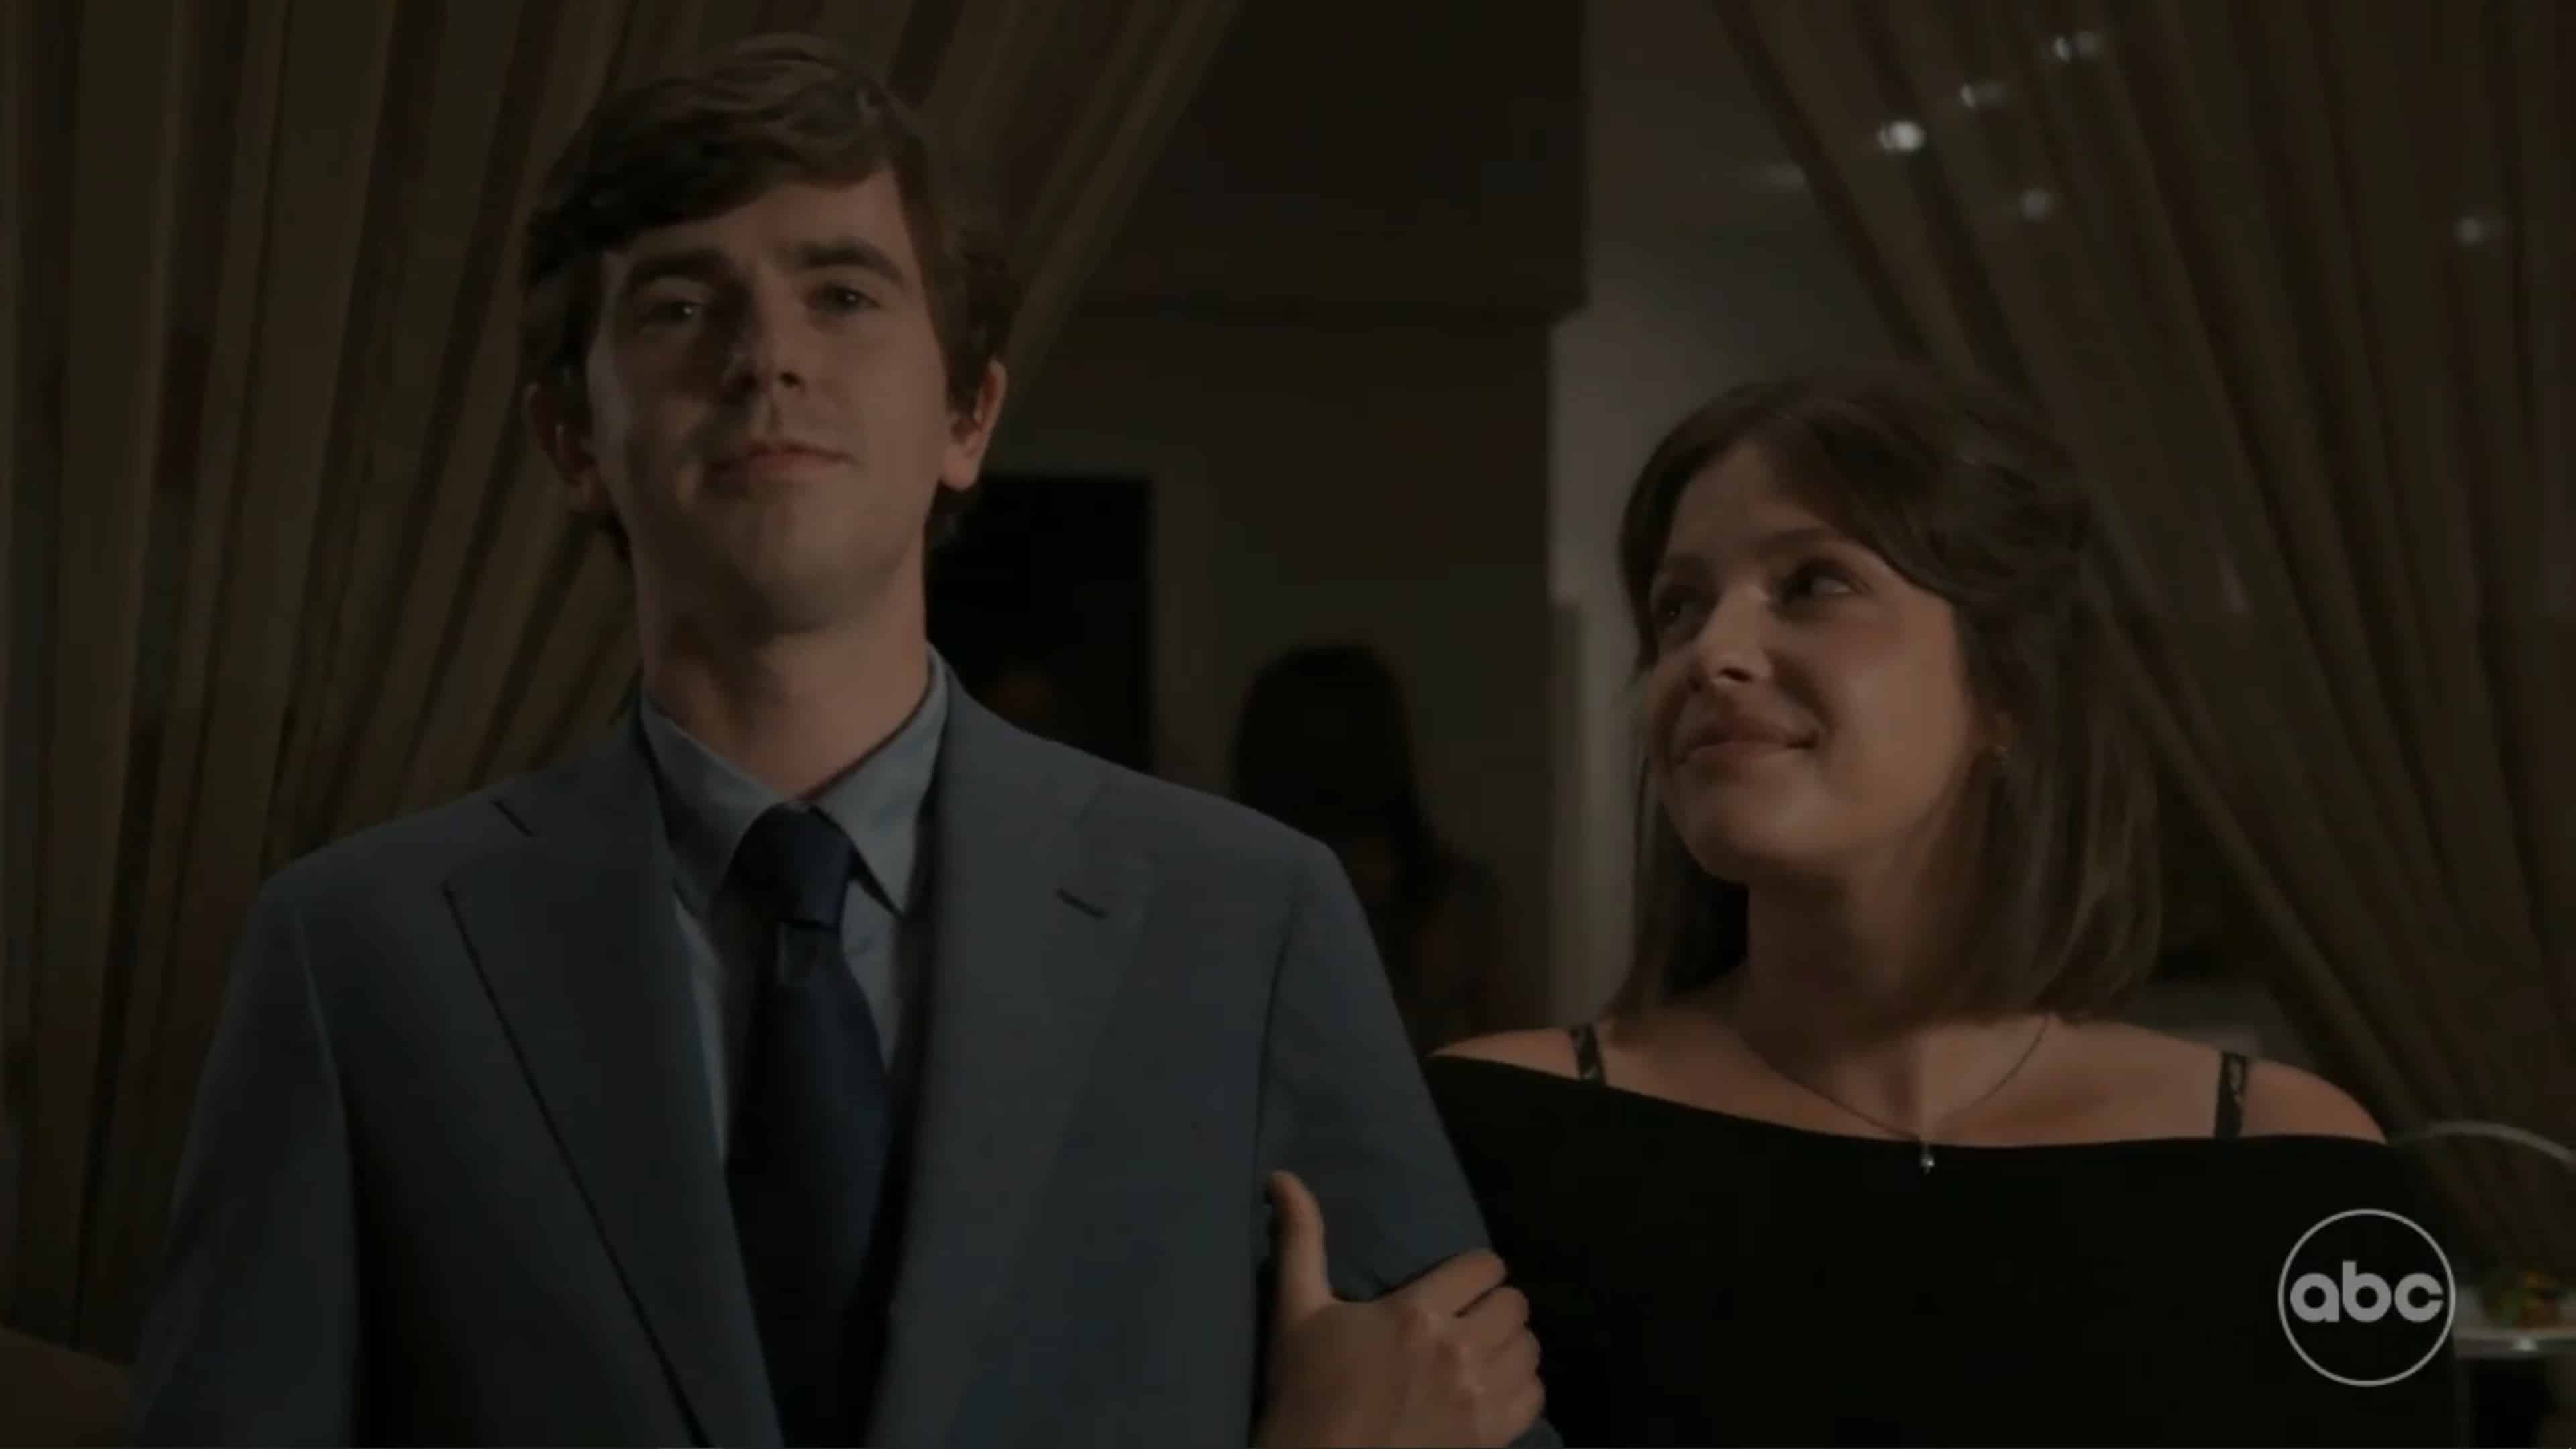 The Good Doctor: Season 5/ Episode 1 “New Beginnings” – Recap/ Review (with Spoilers)